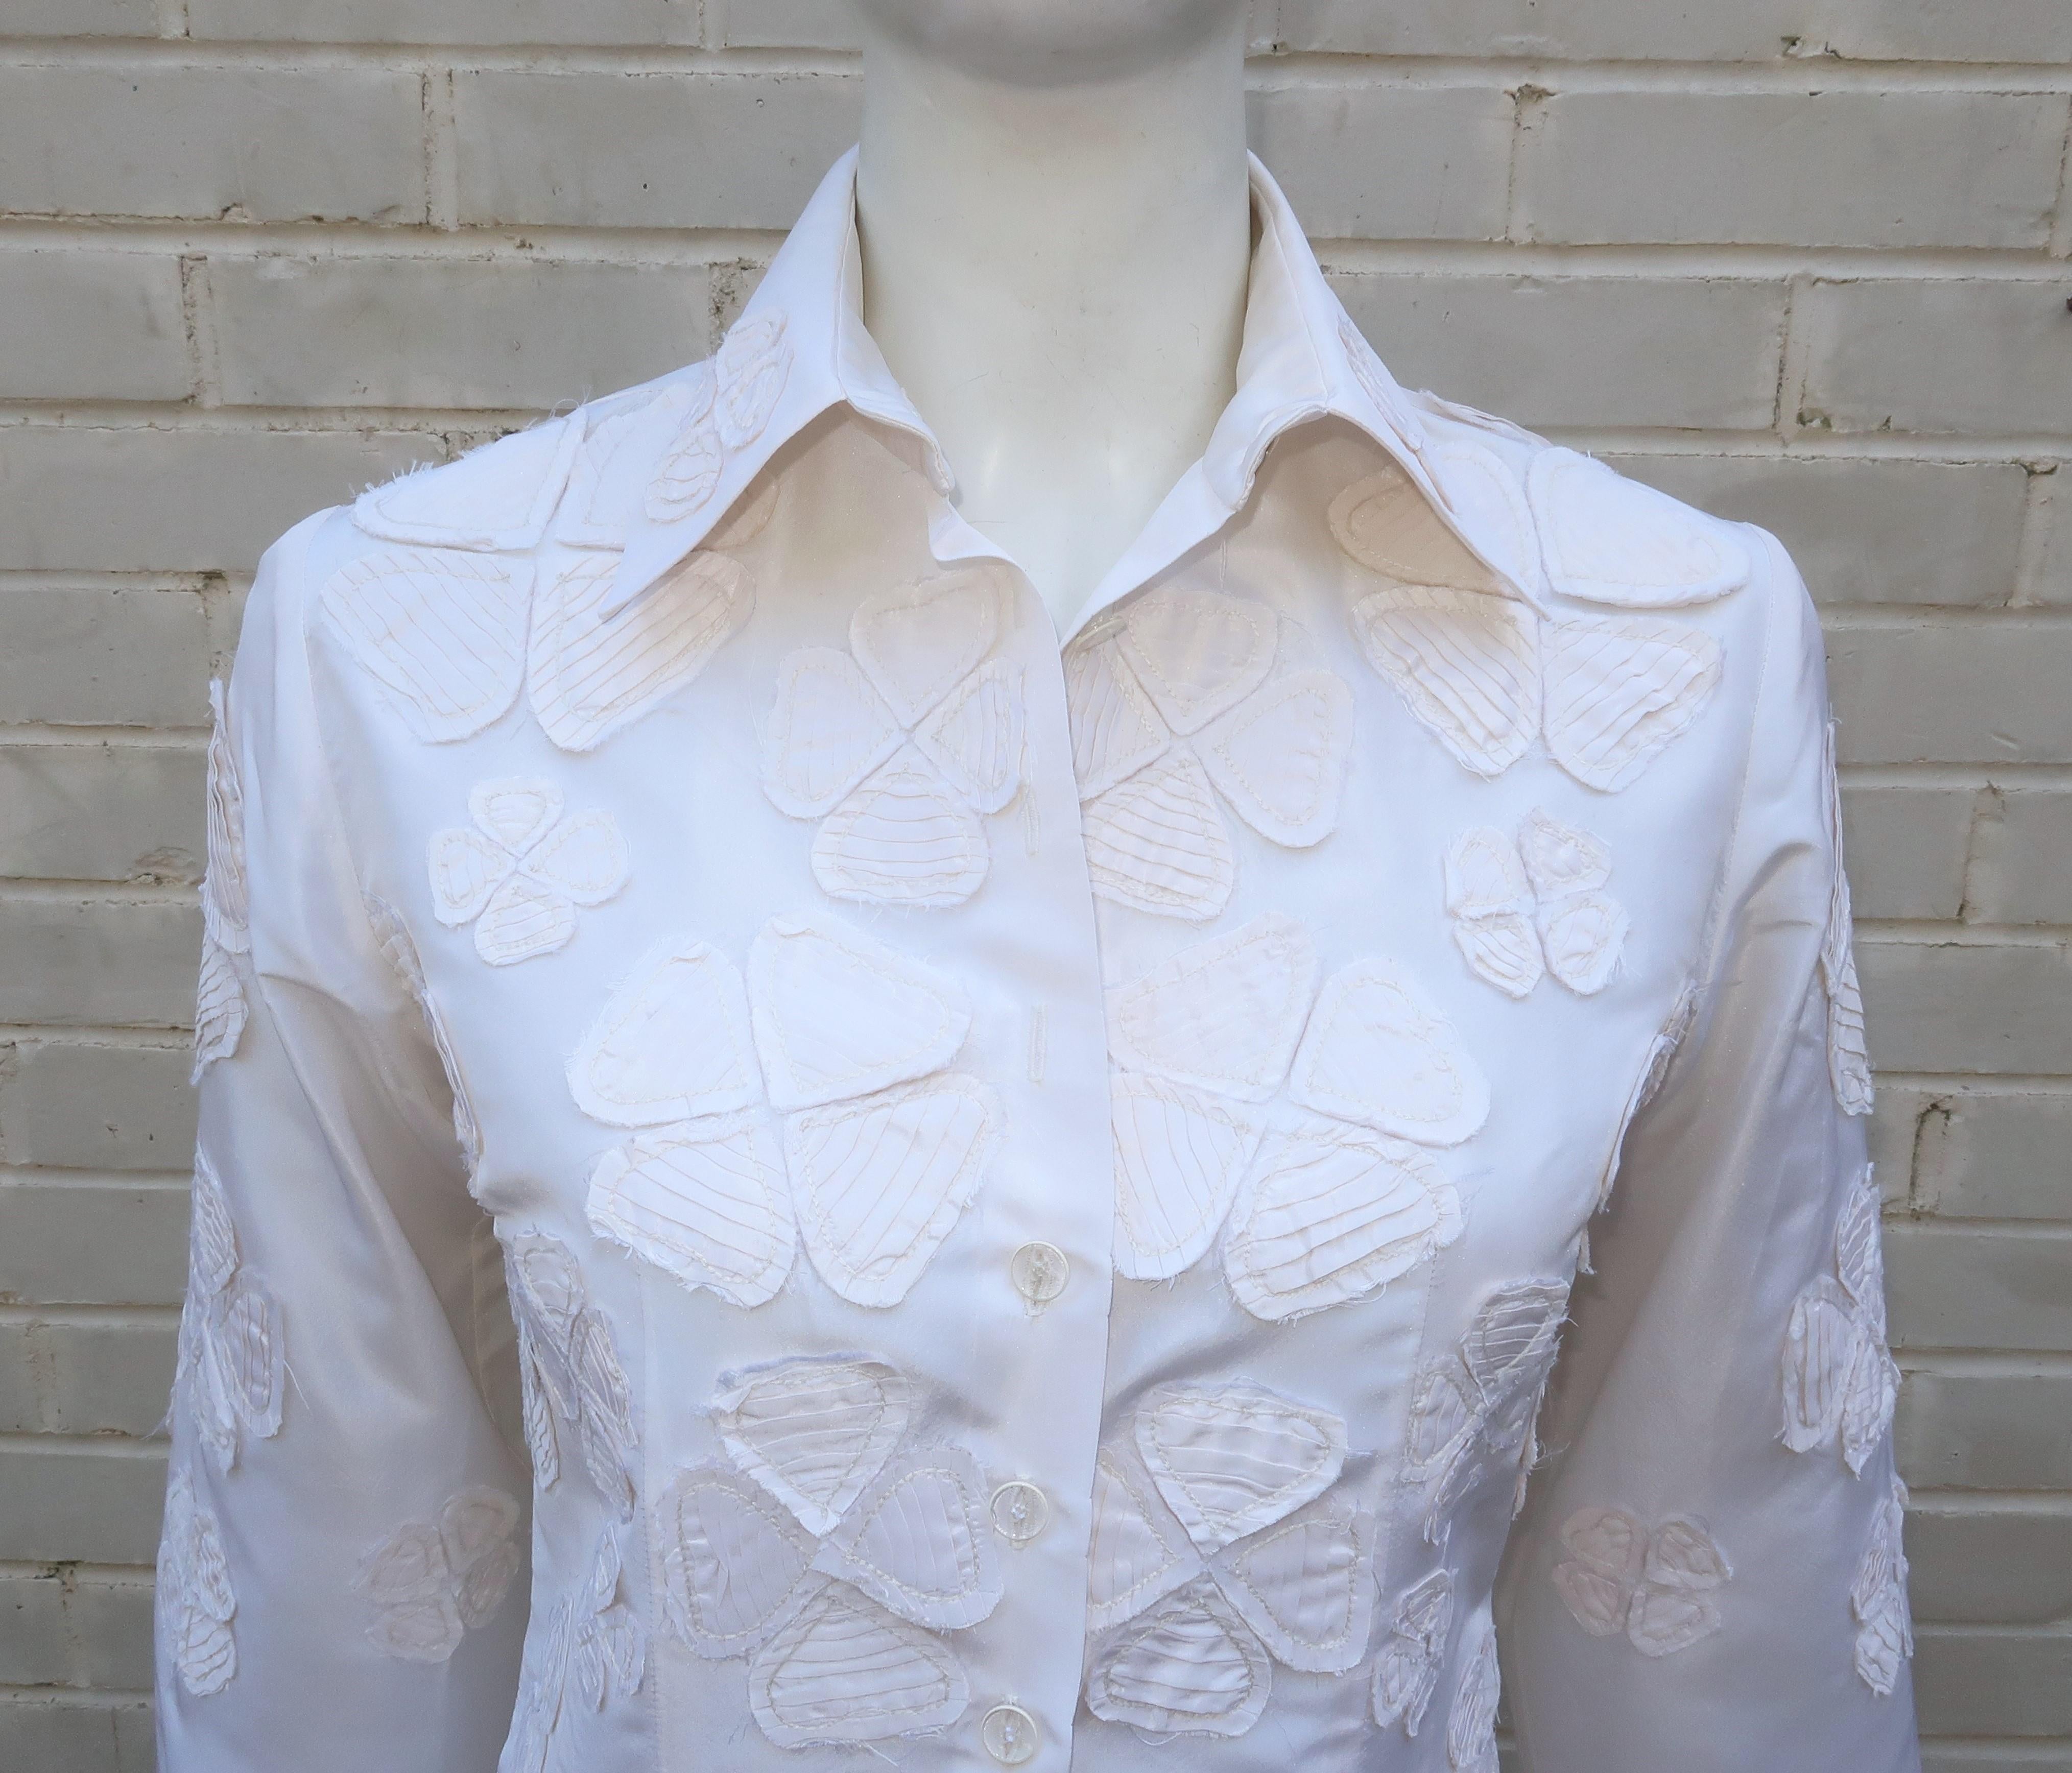 A beautiful crisp white blouse is the signature look for ultra stylish designer, Carolina Herrera.  This blouse features a candlelight white silk taffeta covered in four leaf clover style appliques layered with deconstructed edges.  It buttons at